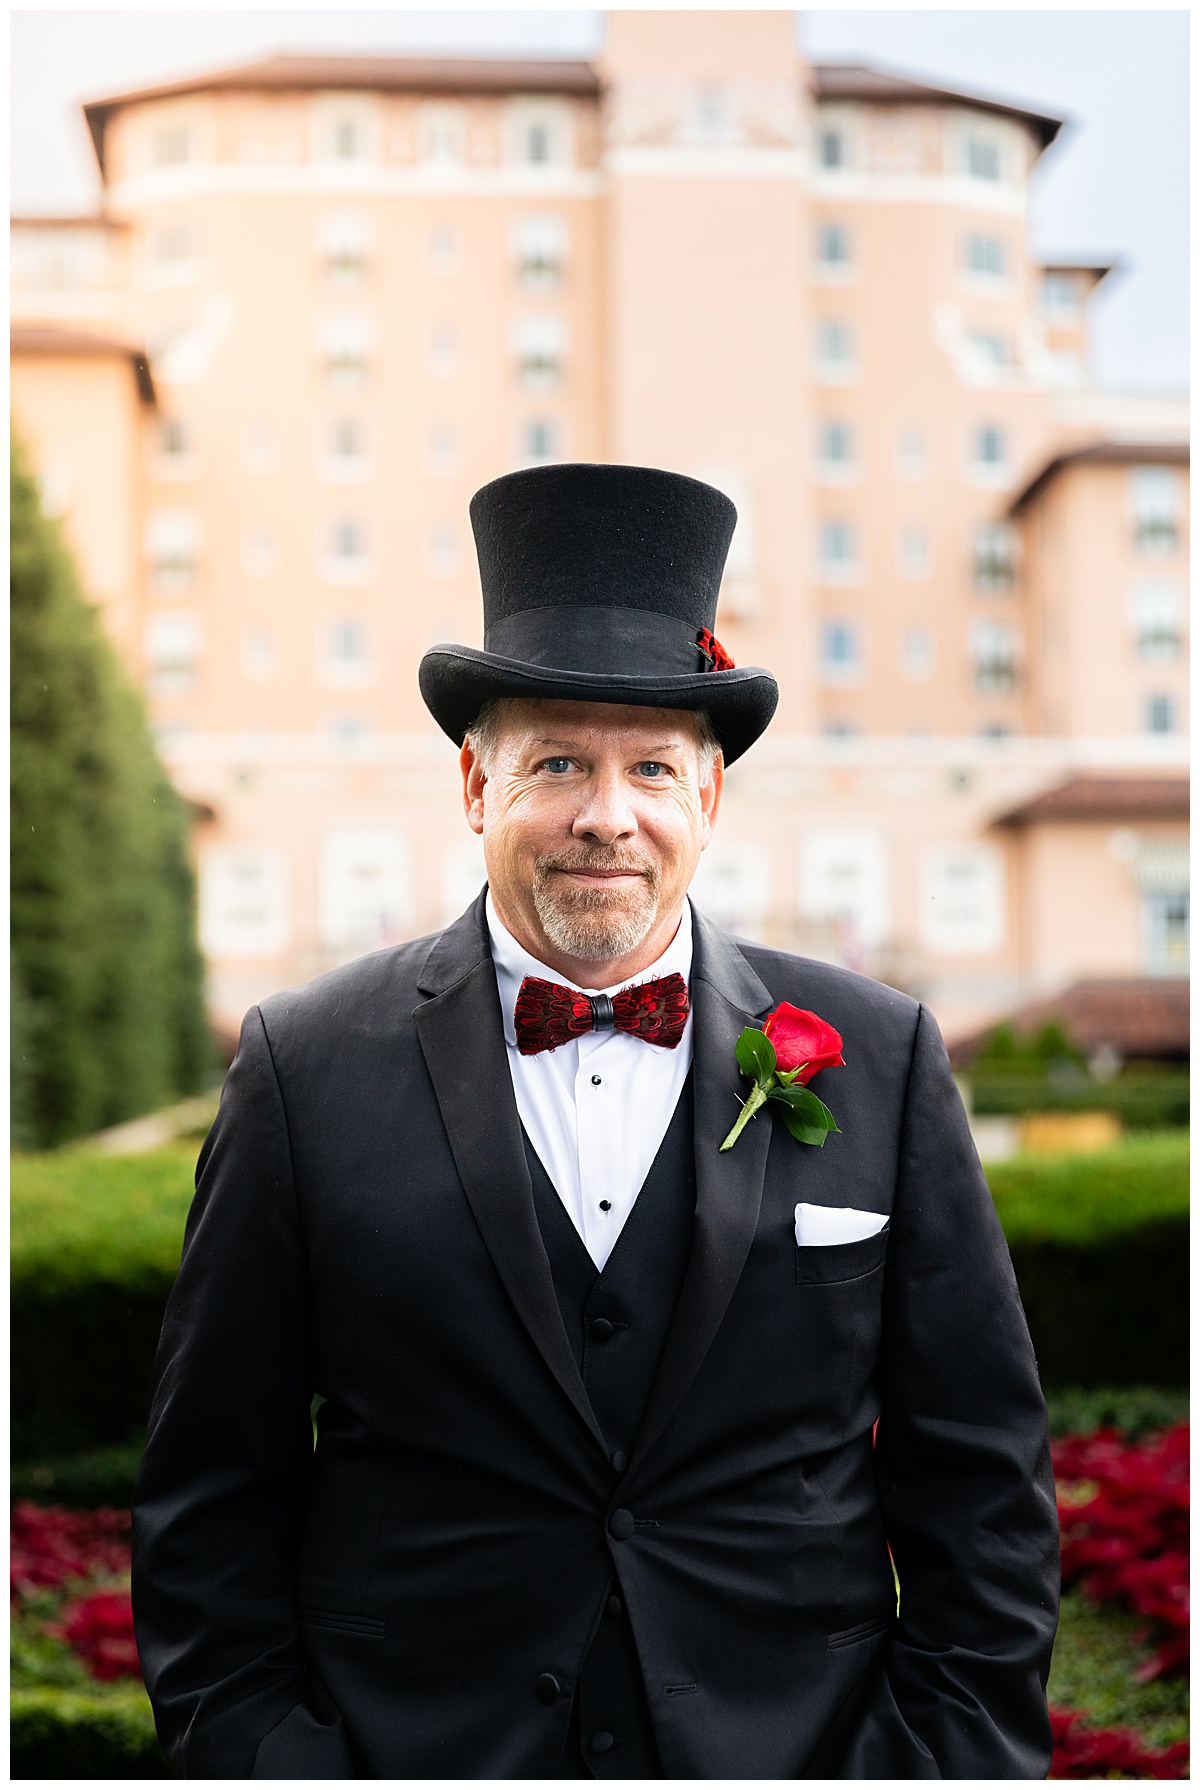 Portraits of a groom during his Broadmoor wedding. The groom is wearing a black suit and black top hat.